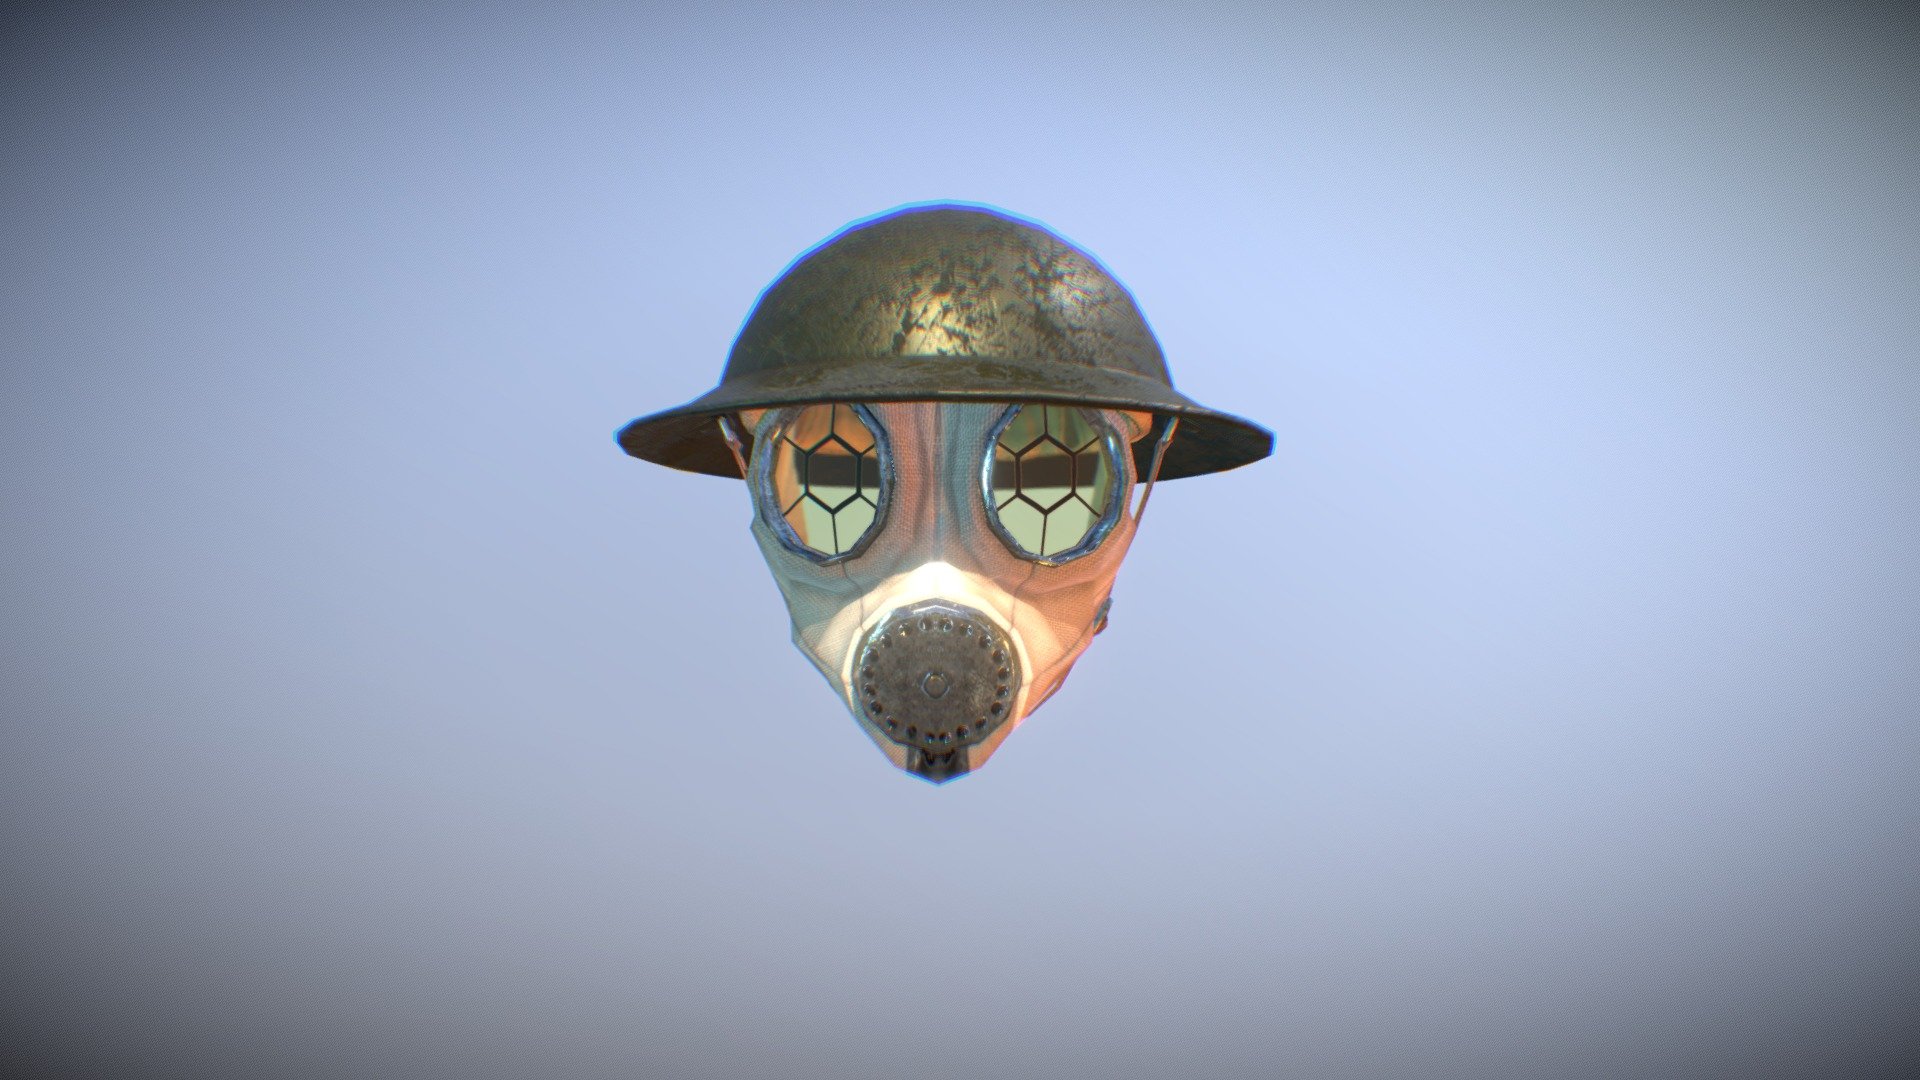 British Helmet with a Gas mask